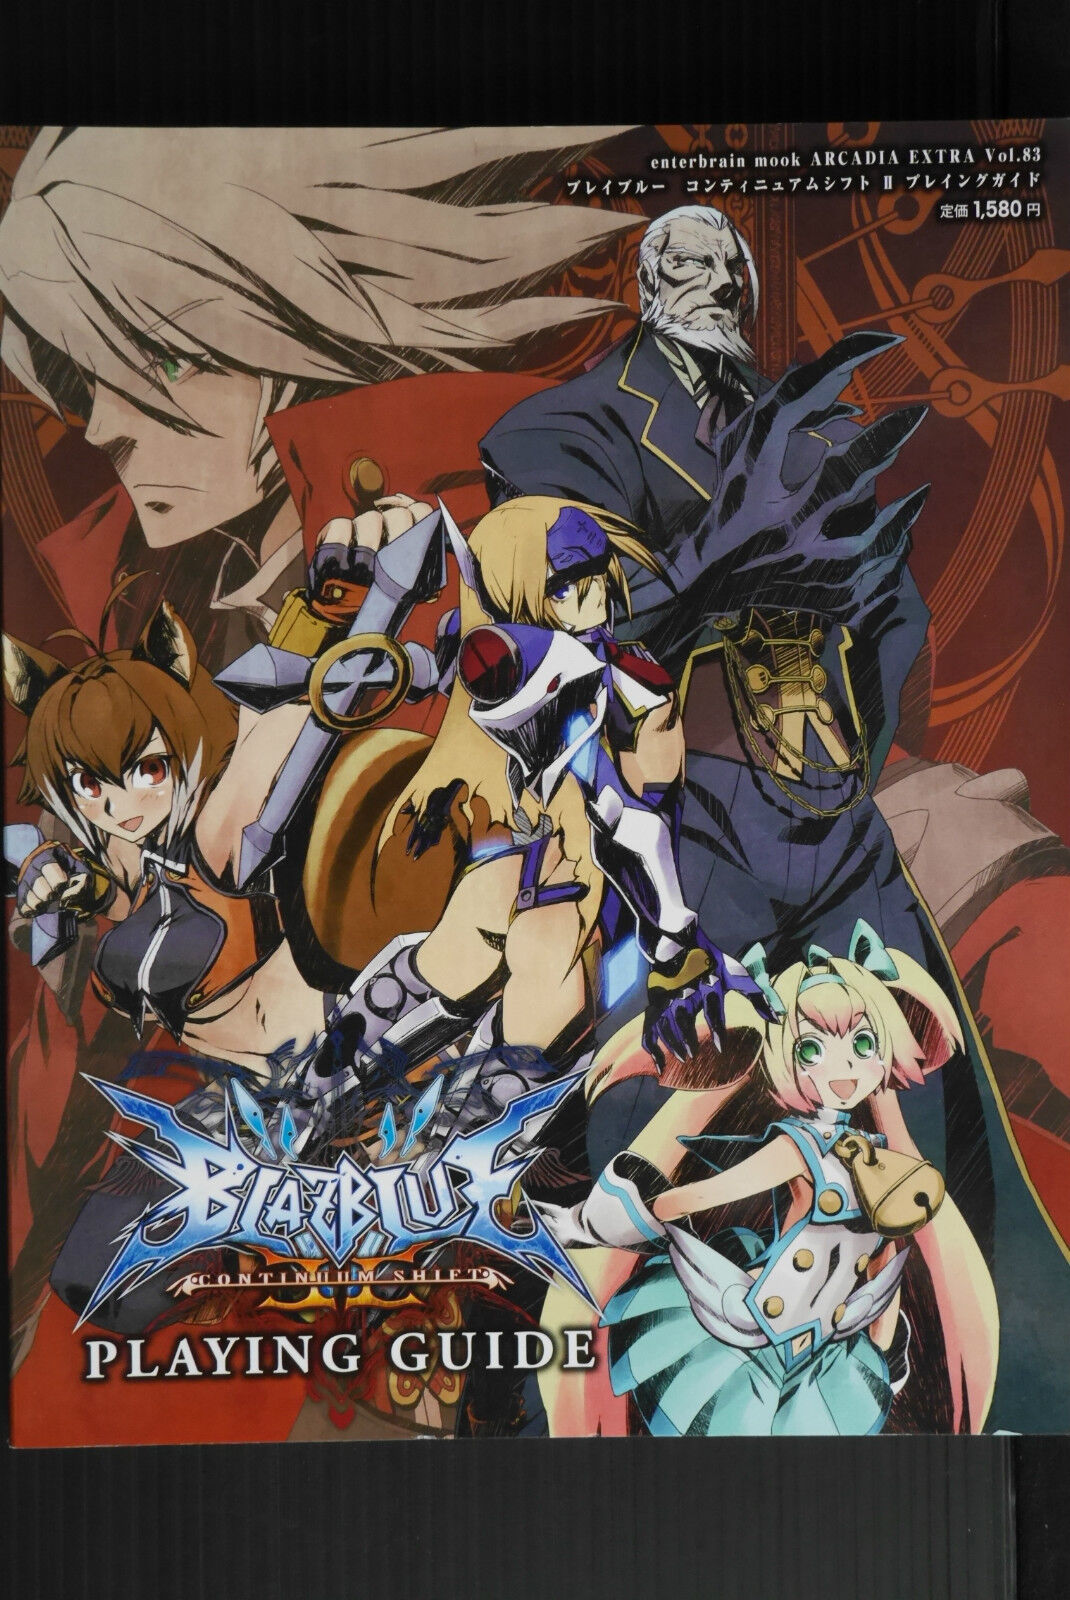 JAPAN BlazBlue Continuum Shift II Playing Guide Book